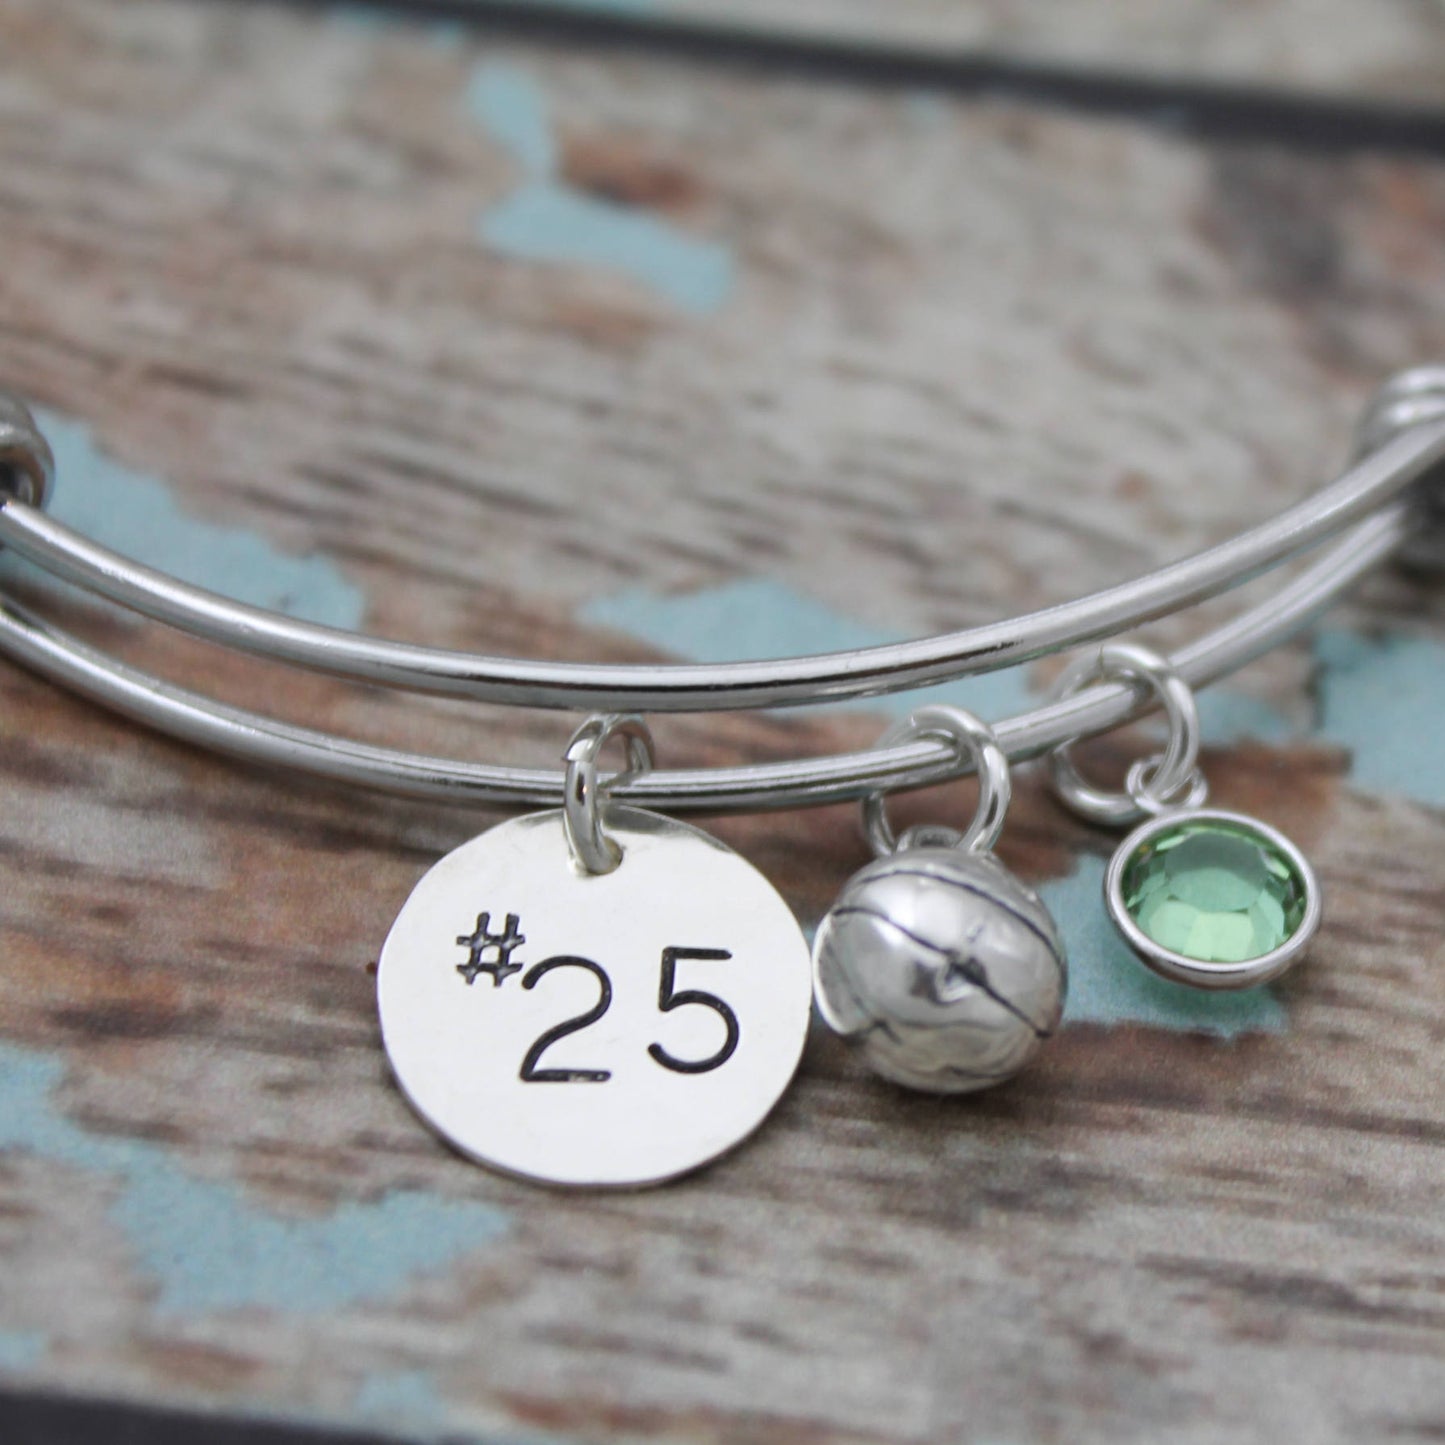 Personalized Basketball Bangle, Basketball Bracelet, Basketball Team Jewelry, Basketball Player Bangle, Initial or Number Hand Stamped